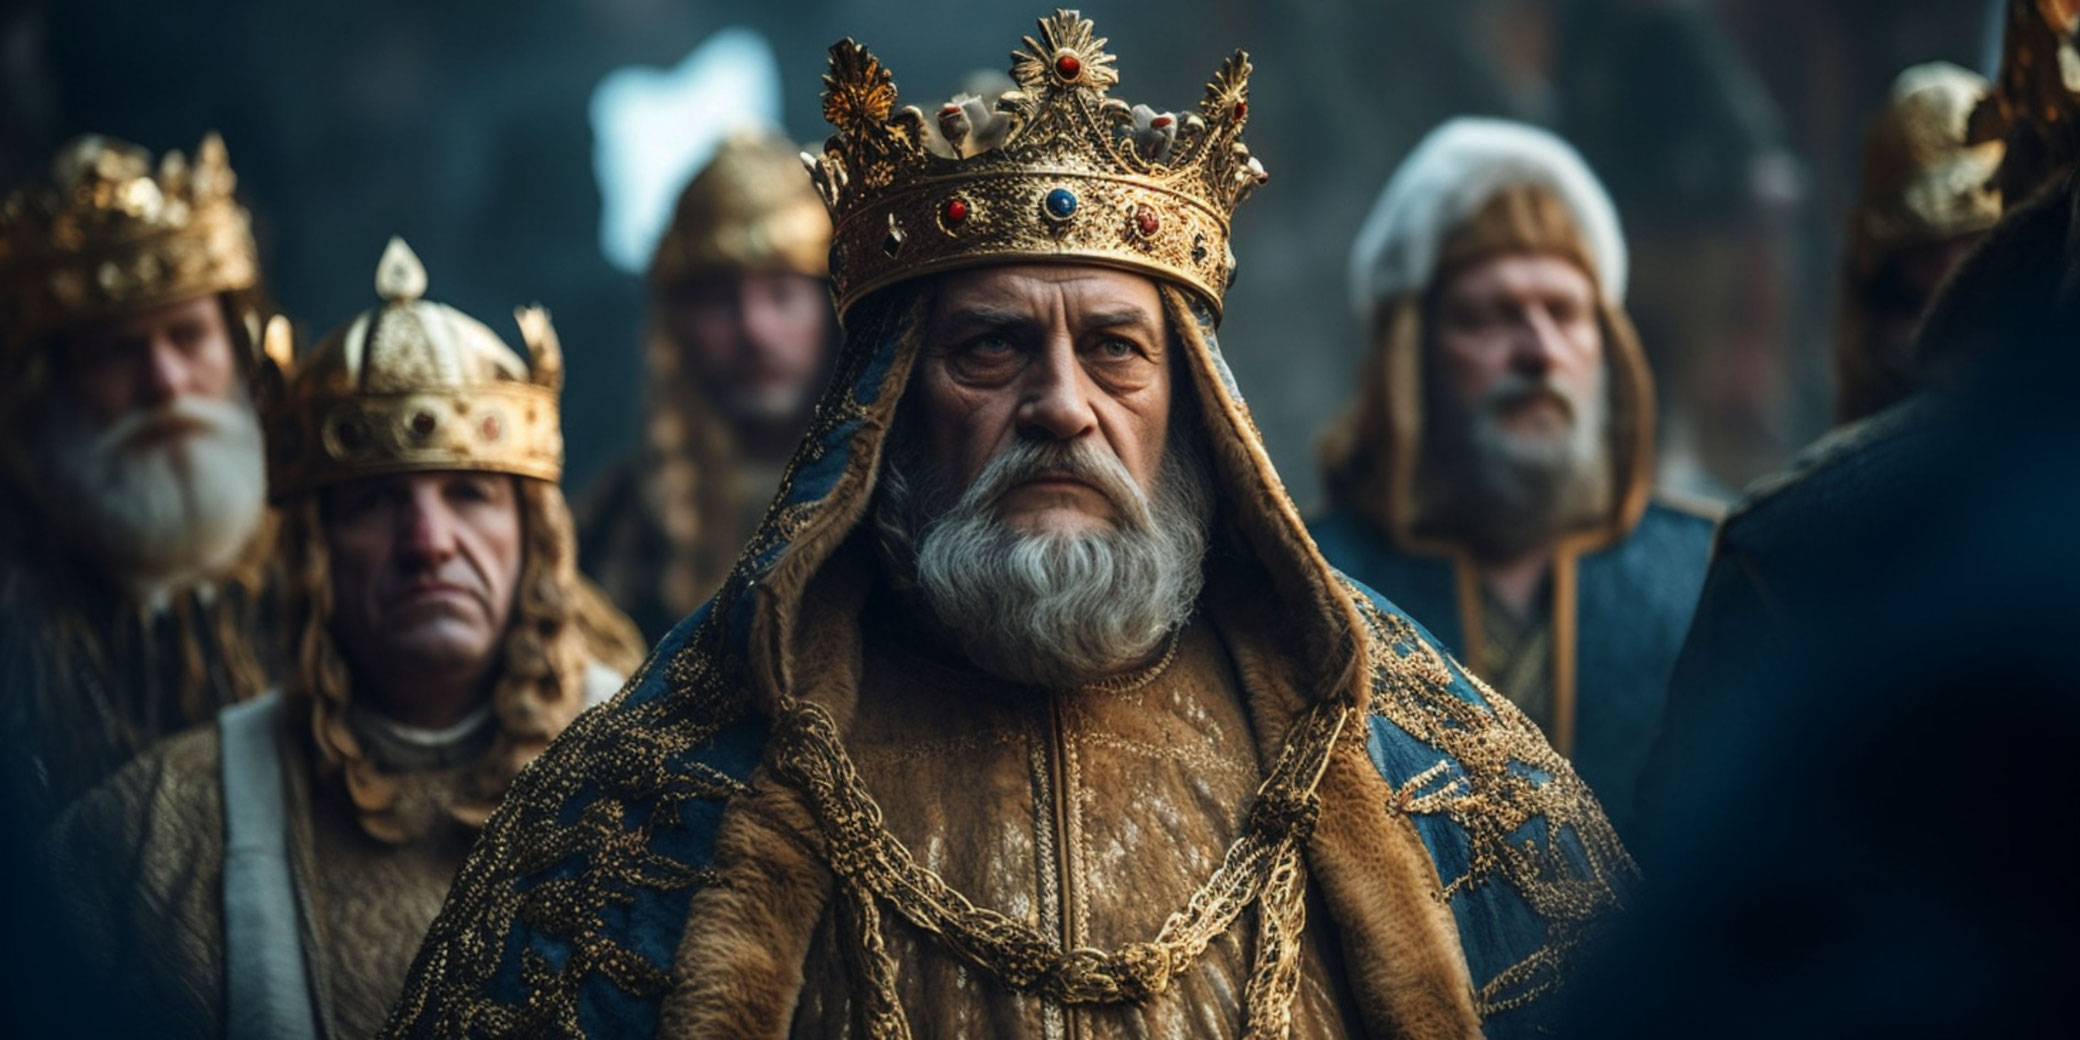 Why is Charlemagne called the 'Father of Europe'?